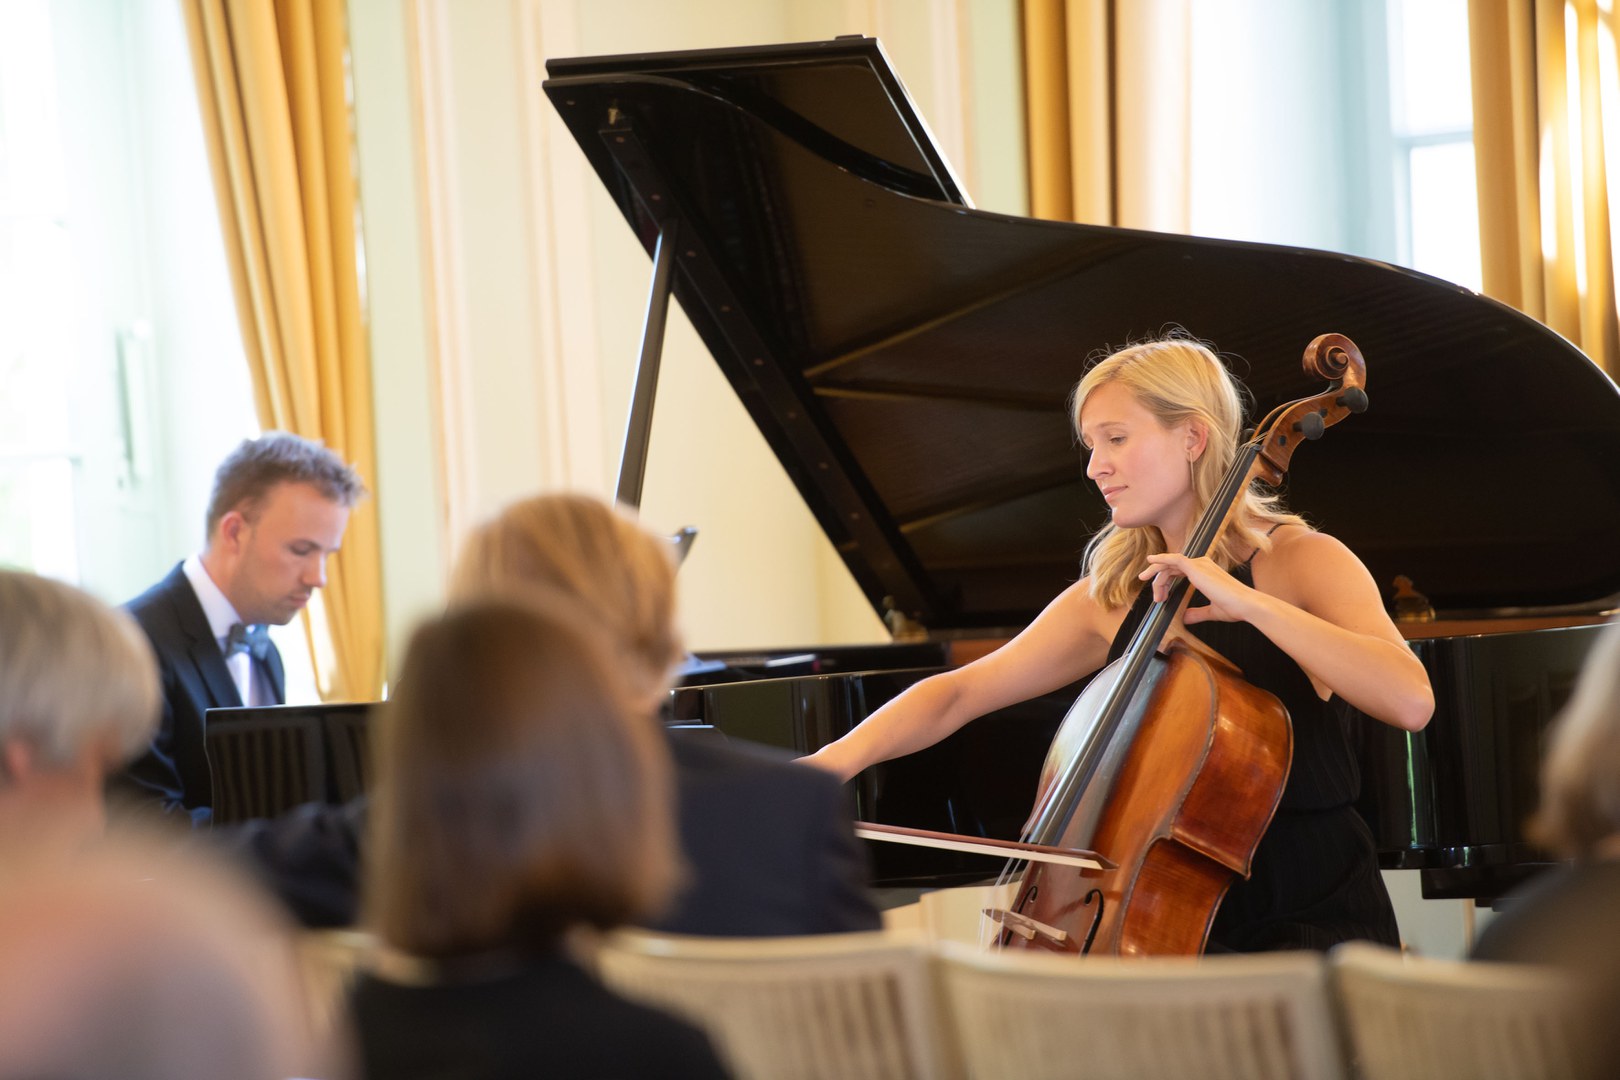 The event was musically accompanied by Max Blumenrath on piano and Ella Rohwehr on cello.